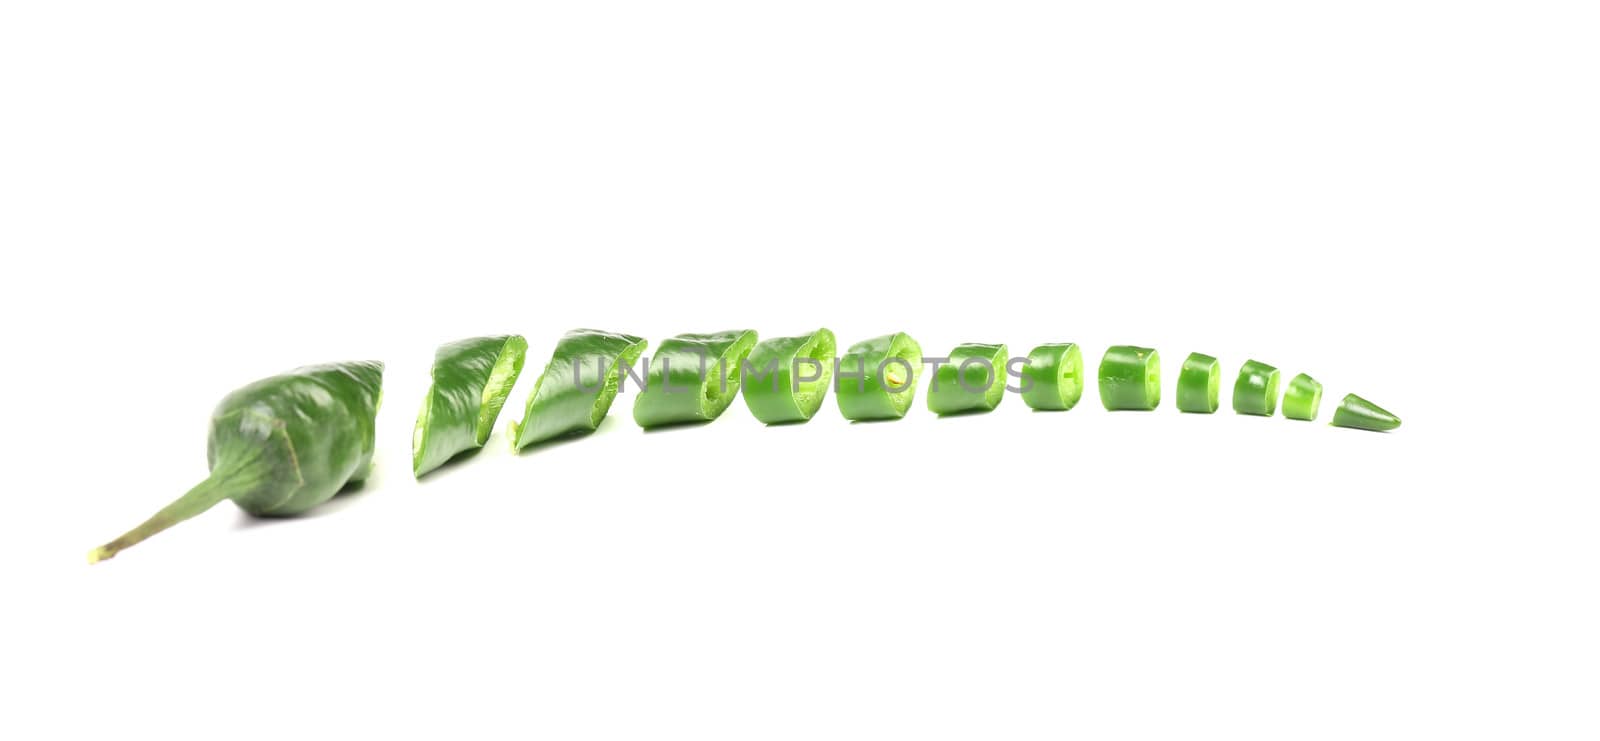 Slices of green chilli pepper. Isolated on a white background.